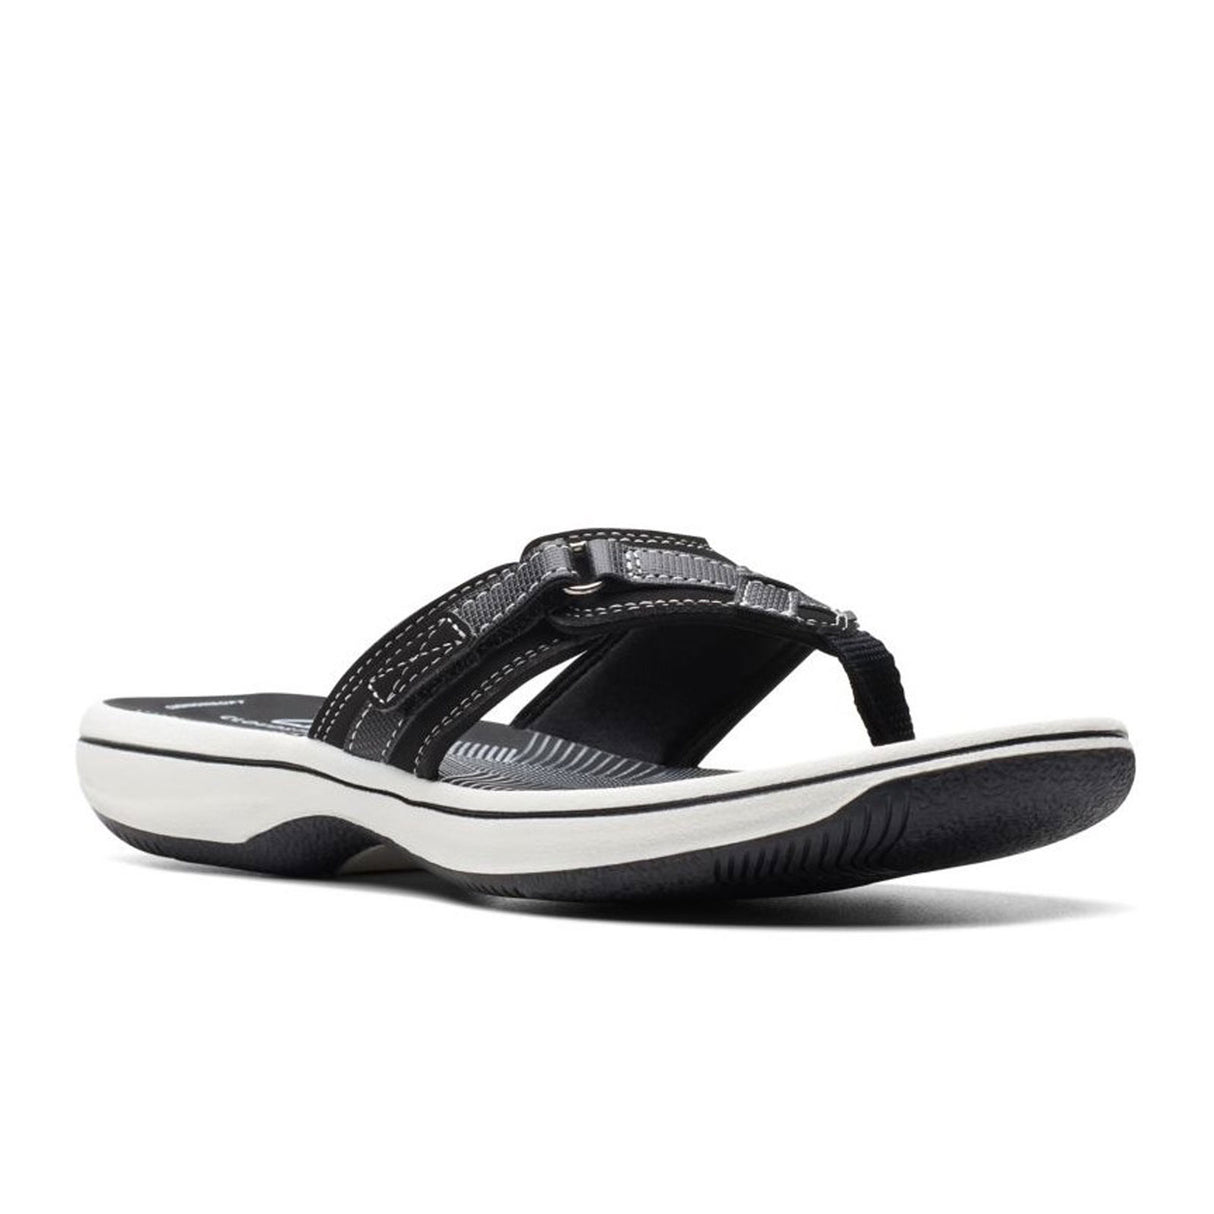 Clarks Breeze Sea Thong Sandal (Women) - Black Synthetic Sandals - Thong - The Heel Shoe Fitters